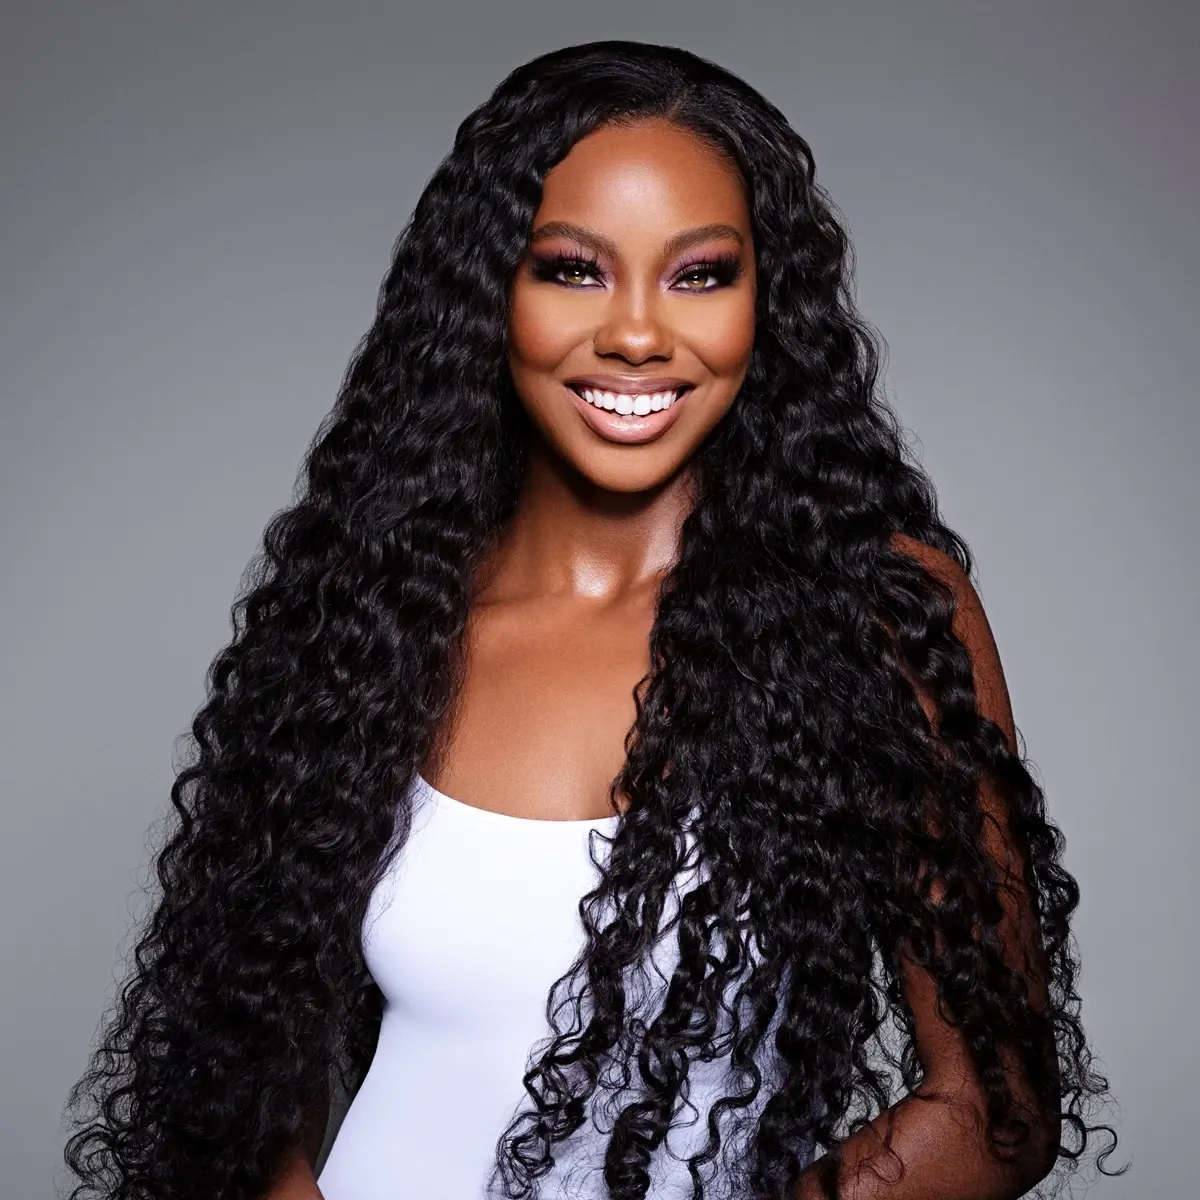 Keep your hair extensions looking brand new with these hair care tips 